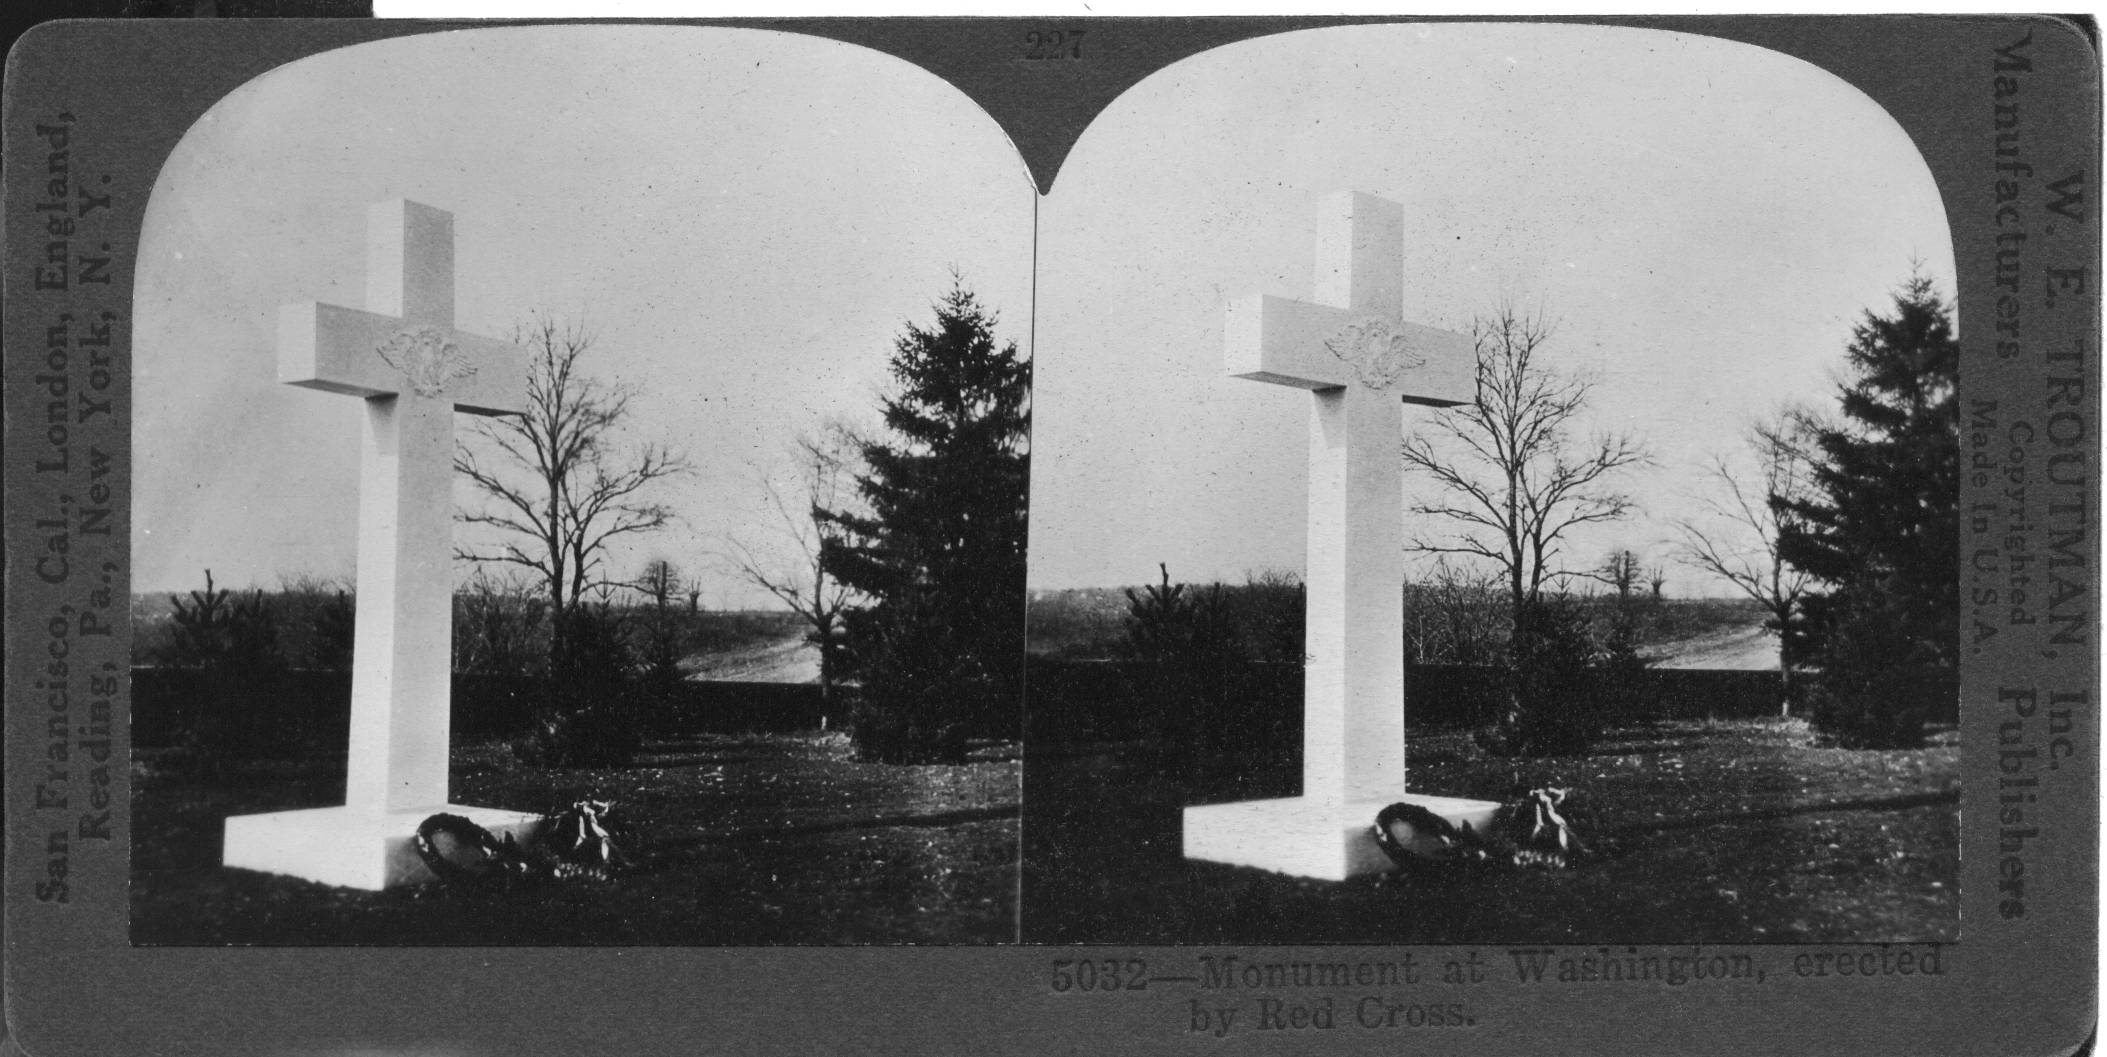 Monument at Washington, erected by Red Cross